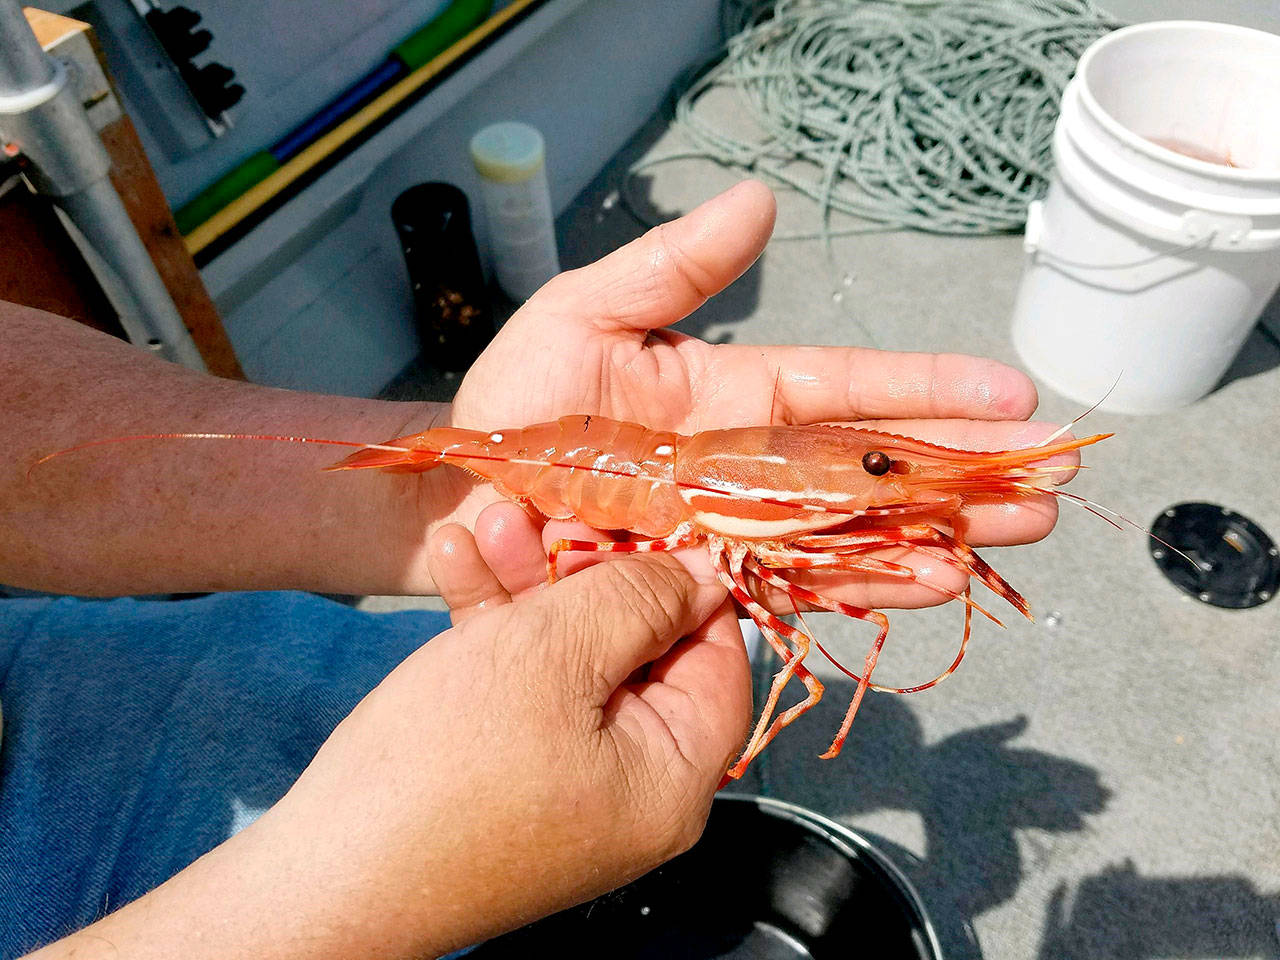 Washington Department of Fish and Wildlife Spot shrimp season will begin in the Strait of Juan de Fuca and Hood Canal on May 19. (State Department of Fish and Wildlife)